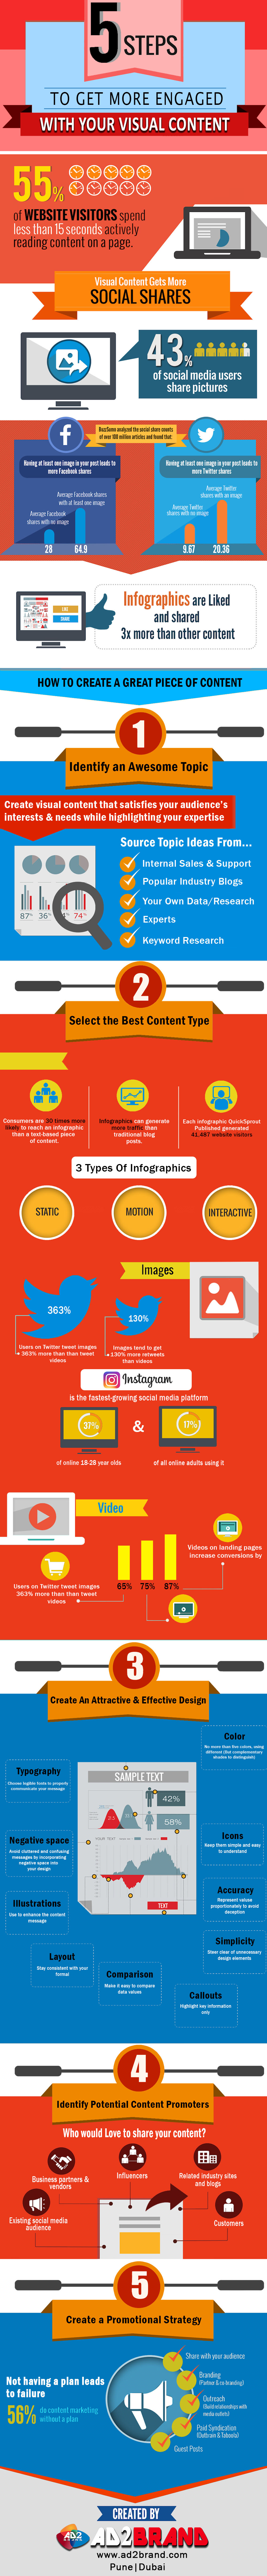 How to increase your visual content engagement